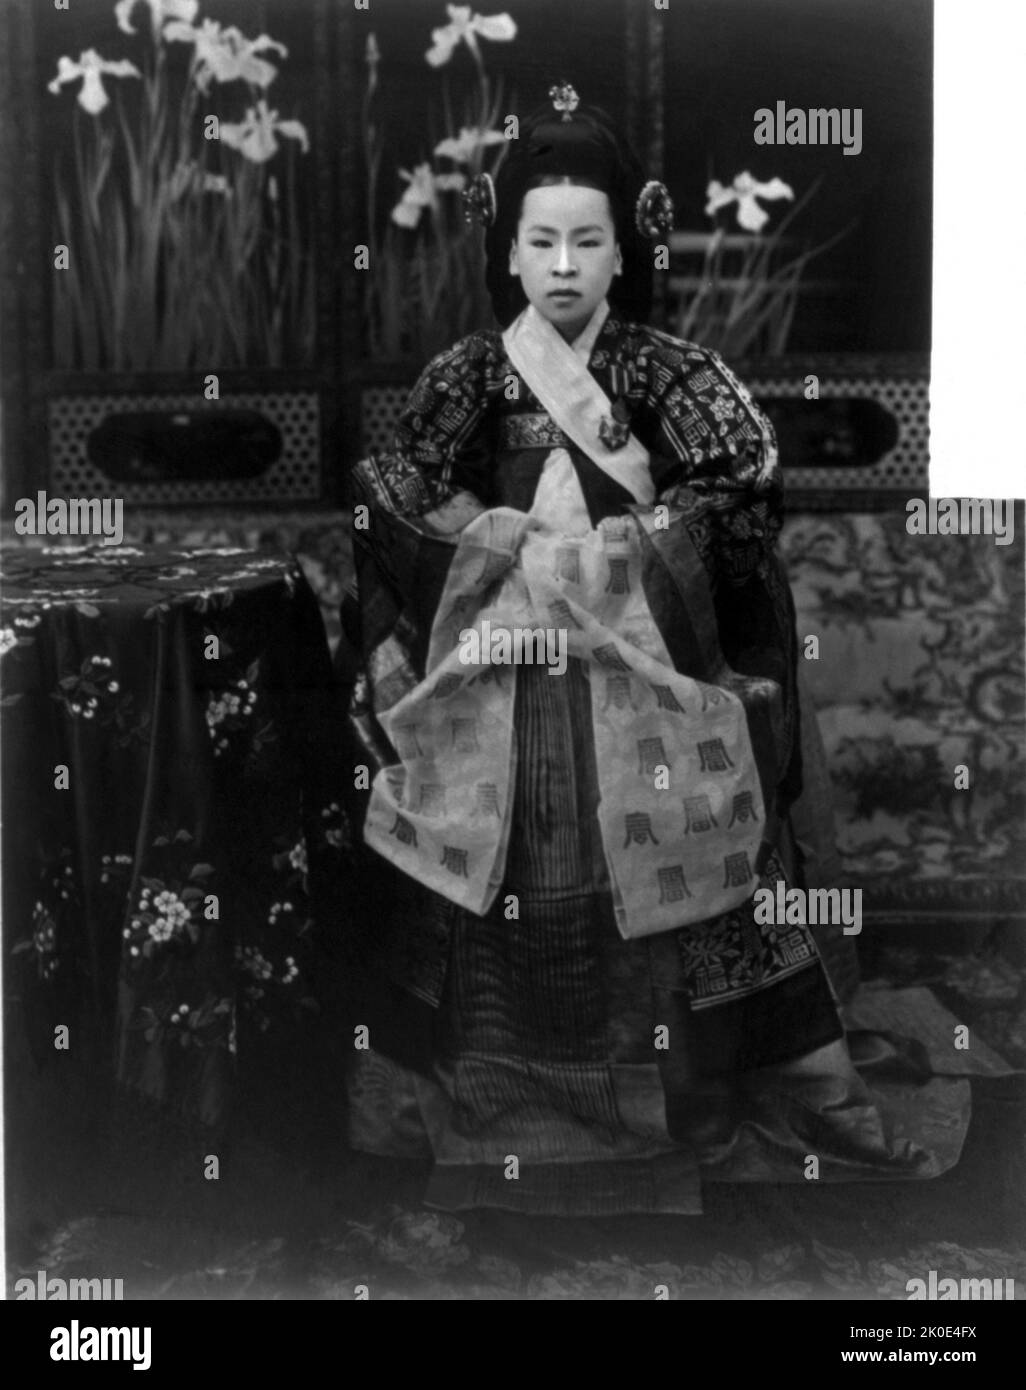 Empress Sunjeonghyo (1894 - 1966), of the Haepyeong Yun clan, was the second wife and Empress Consort of Emperor Yunghui, the last emperor of the Joseon Dynasty, Korean Empire. Stock Photo